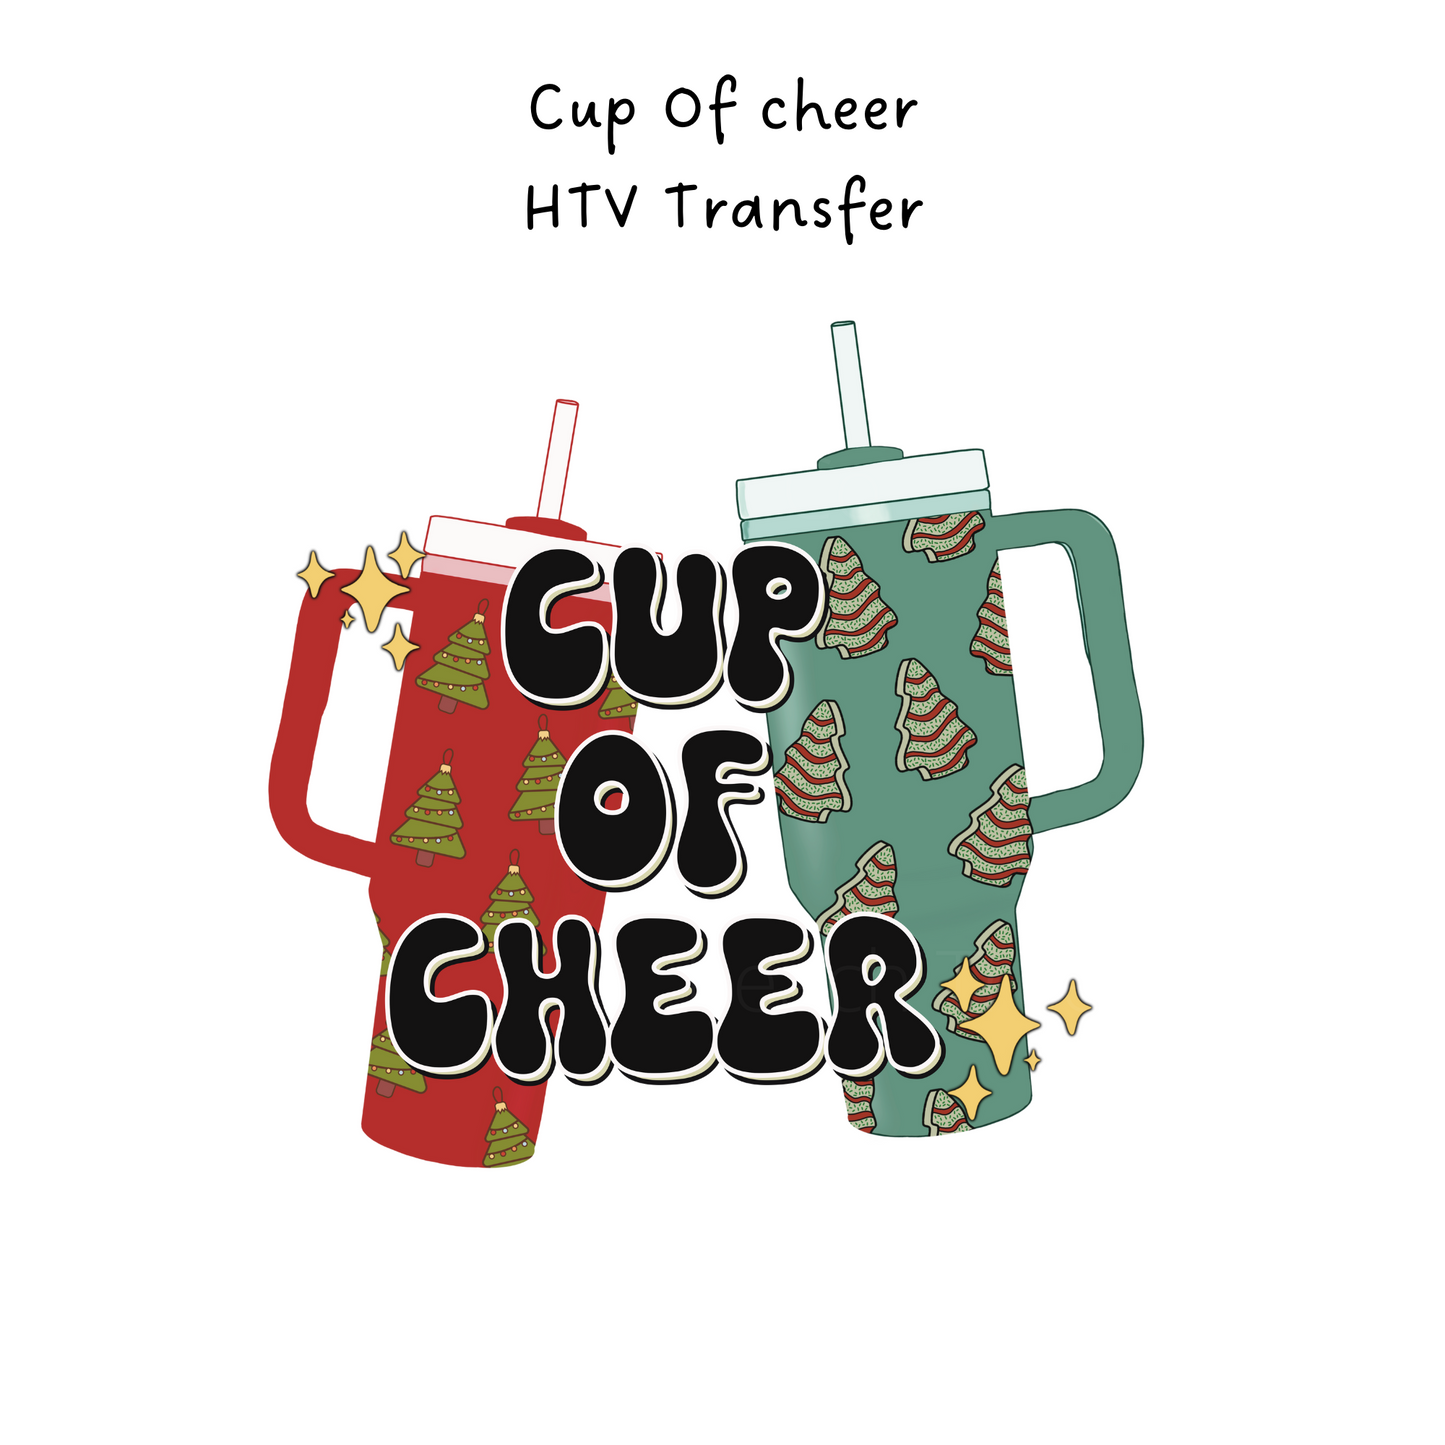 Cup Of cheer HTV Transfer